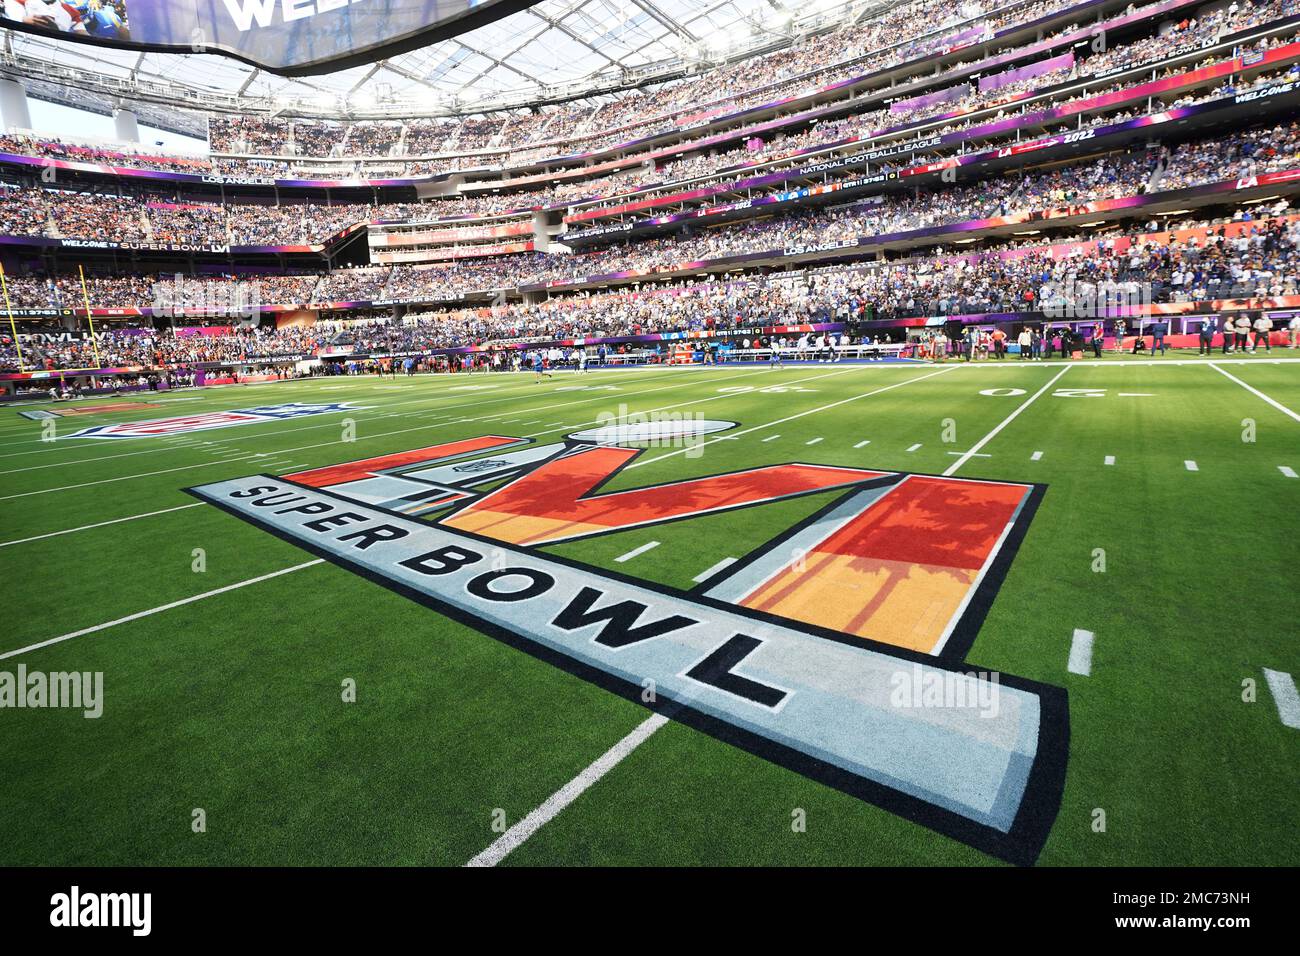 The Super Bowl logo on the field before the Los Angeles Rams take